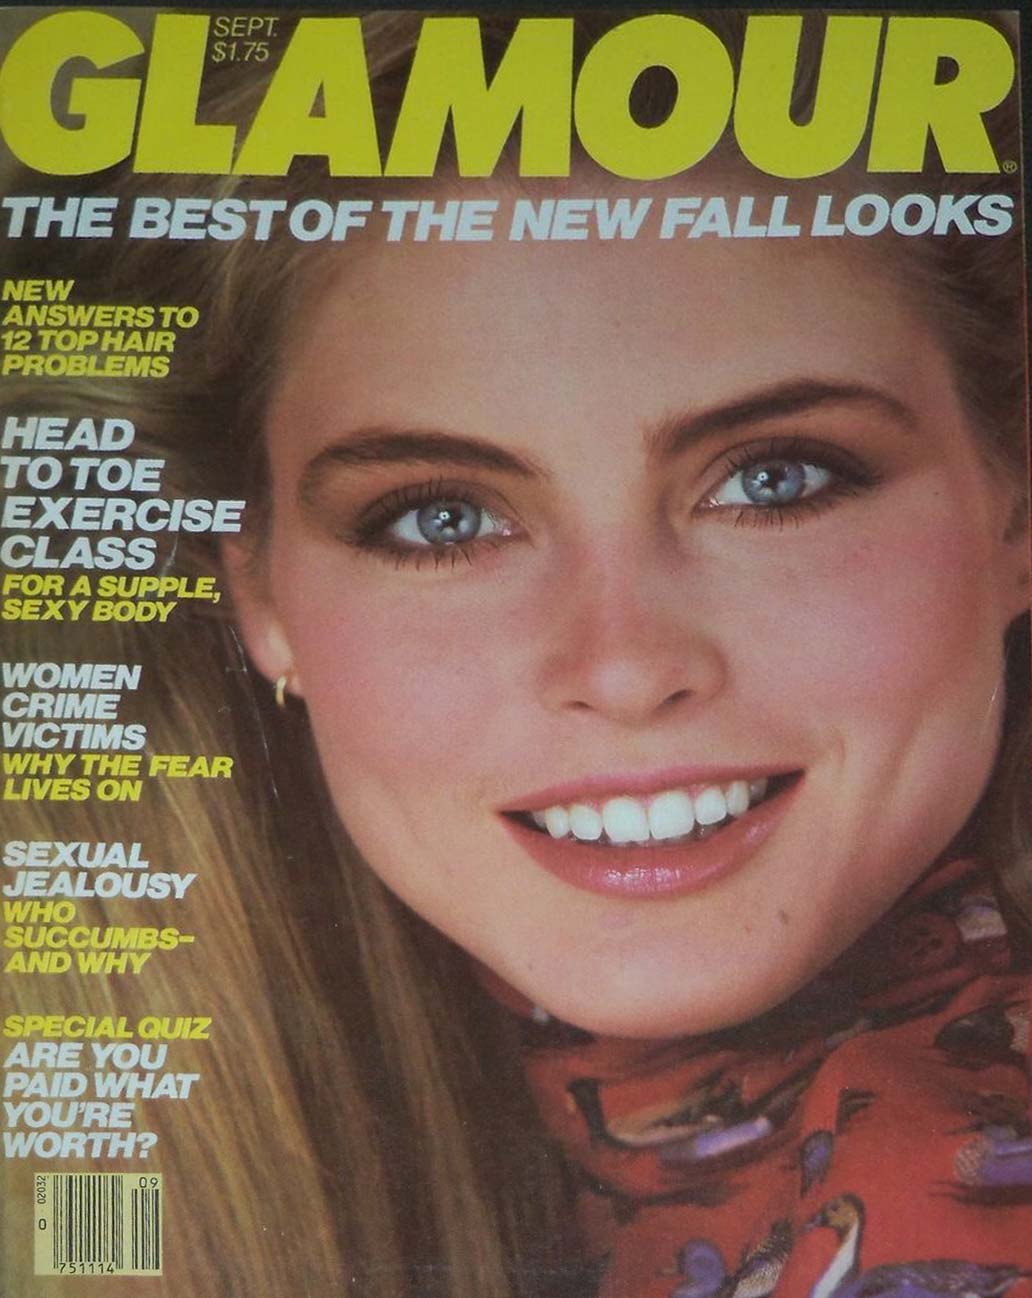 Glamour September 1981 magazine back issue Glamour magizine back copy Glamour September 1981 Womens Magazine Back Issue Published by Conde Nast Publications. New Answers To 12 Top Hair Problems.